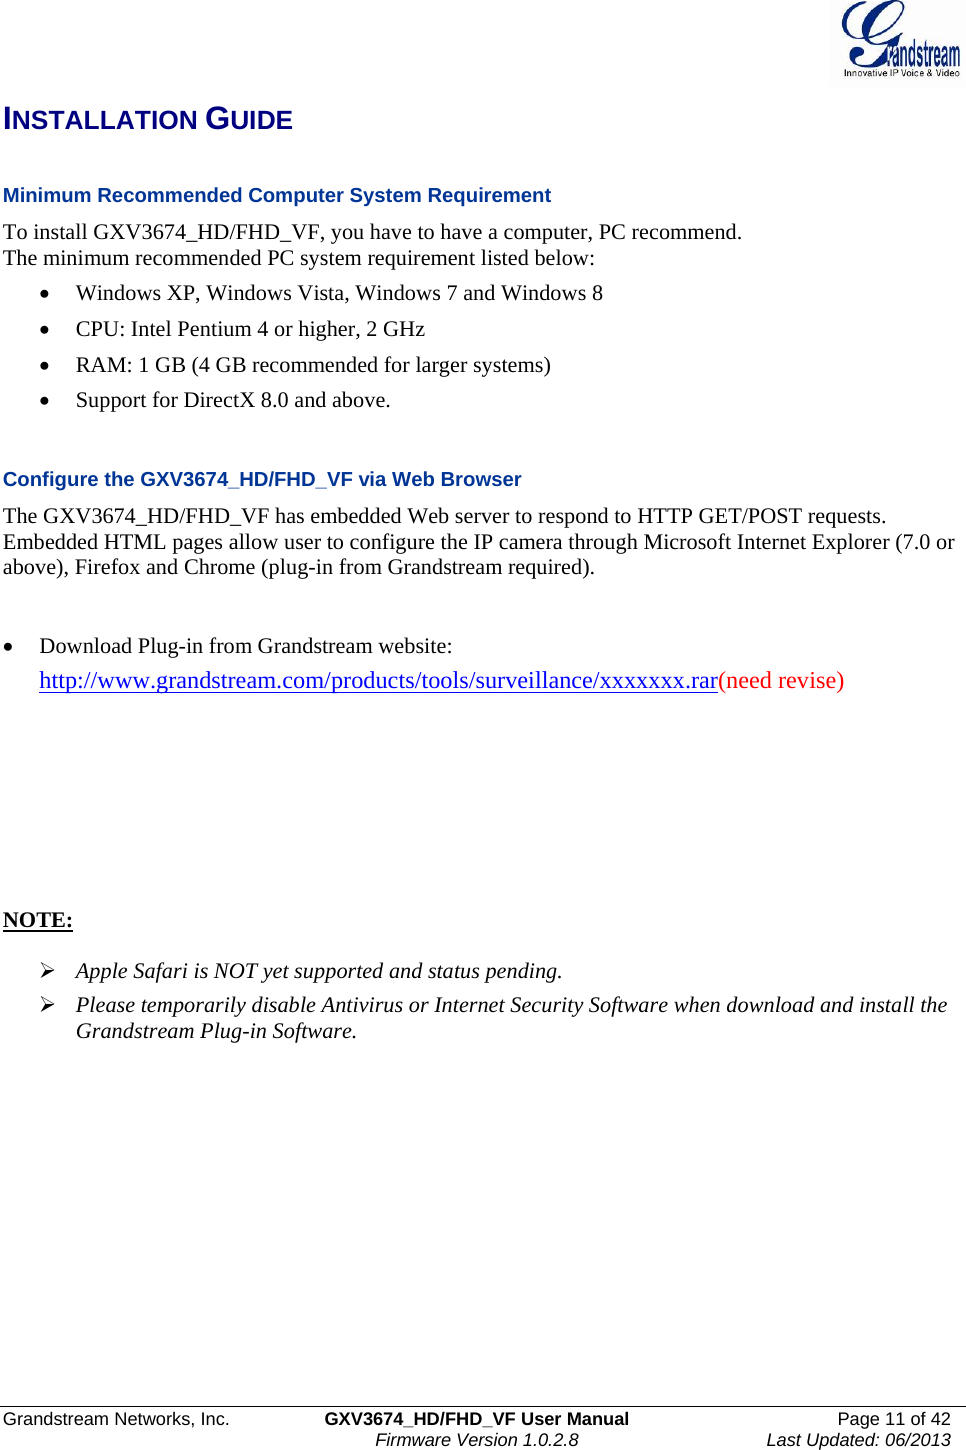  Grandstream Networks, Inc.  GXV3674_HD/FHD_VF User Manual  Page 11 of 42   Firmware Version 1.0.2.8  Last Updated: 06/2013  INSTALLATION GUIDE  Minimum Recommended Computer System Requirement To install GXV3674_HD/FHD_VF, you have to have a computer, PC recommend.  The minimum recommended PC system requirement listed below:  • Windows XP, Windows Vista, Windows 7 and Windows 8 • CPU: Intel Pentium 4 or higher, 2 GHz • RAM: 1 GB (4 GB recommended for larger systems) • Support for DirectX 8.0 and above.    Configure the GXV3674_HD/FHD_VF via Web Browser The GXV3674_HD/FHD_VF has embedded Web server to respond to HTTP GET/POST requests. Embedded HTML pages allow user to configure the IP camera through Microsoft Internet Explorer (7.0 or above), Firefox and Chrome (plug-in from Grandstream required).    • Download Plug-in from Grandstream website:  http://www.grandstream.com/products/tools/surveillance/xxxxxxx.rar(need revise)        NOTE:   ¾ Apple Safari is NOT yet supported and status pending.  ¾ Please temporarily disable Antivirus or Internet Security Software when download and install the Grandstream Plug-in Software.  